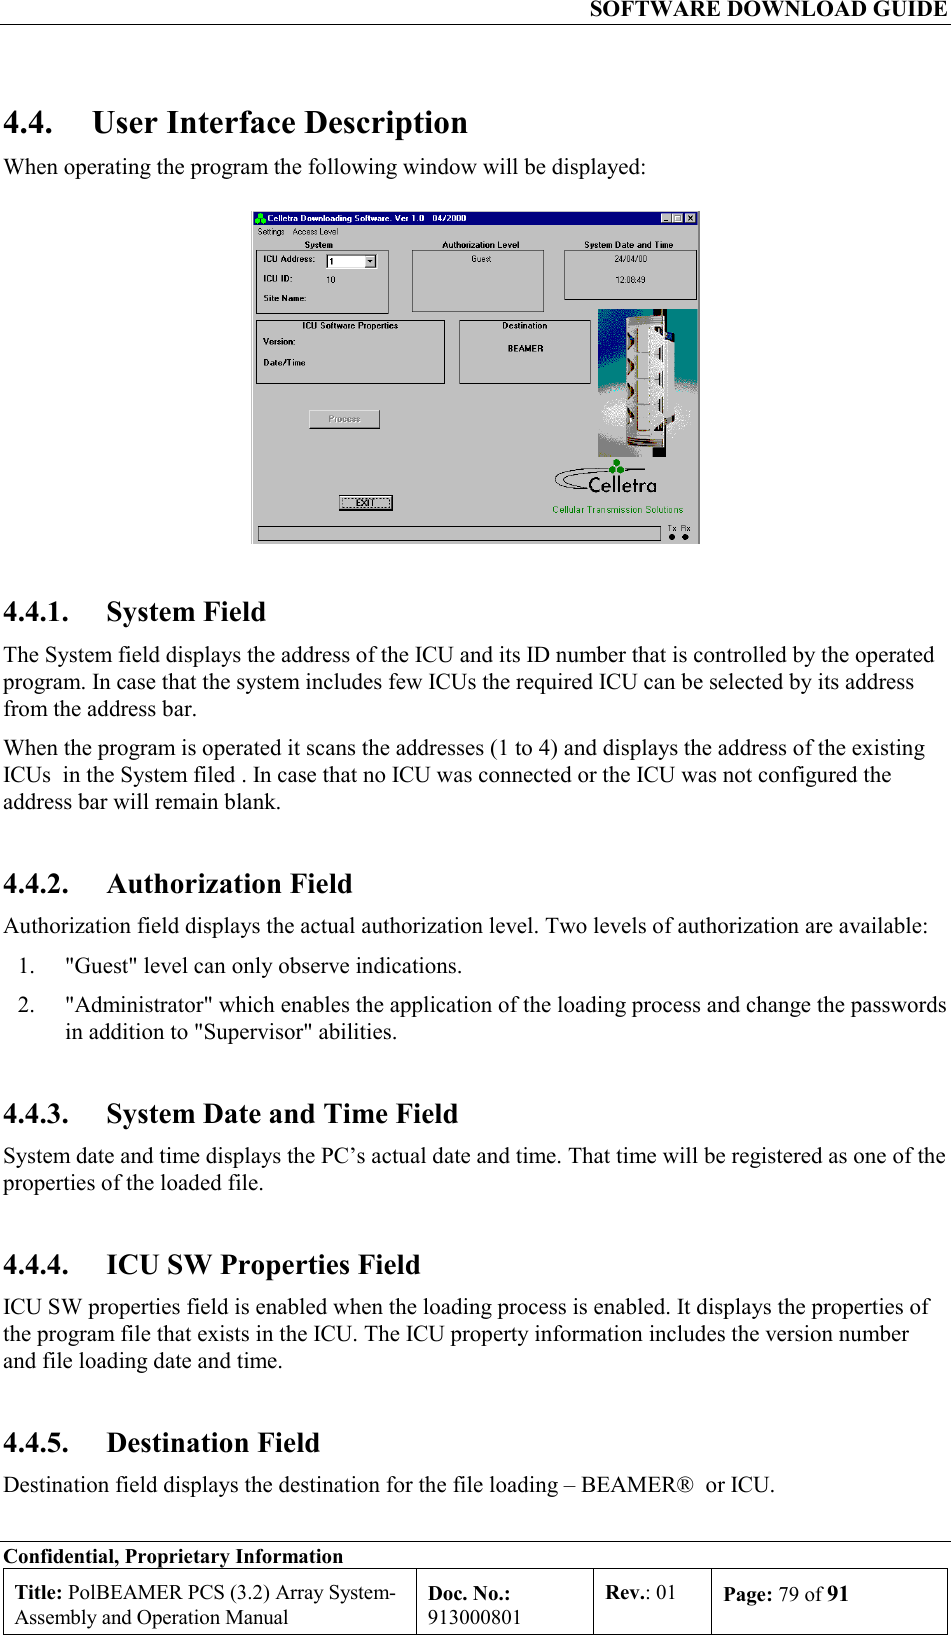   SOFTWARE DOWNLOAD GUIDE Confidential, Proprietary Information Title: PolBEAMER PCS (3.2) Array System- Assembly and Operation Manual Doc. No.: 913000801 Rev.: 01  Page: 79 of 91  4.4.  User Interface Description When operating the program the following window will be displayed:  4.4.1. System Field The System field displays the address of the ICU and its ID number that is controlled by the operated program. In case that the system includes few ICUs the required ICU can be selected by its address from the address bar.   When the program is operated it scans the addresses (1 to 4) and displays the address of the existing ICUs  in the System filed . In case that no ICU was connected or the ICU was not configured the address bar will remain blank.  4.4.2. Authorization Field Authorization field displays the actual authorization level. Two levels of authorization are available: 1.  &quot;Guest&quot; level can only observe indications. 2.  &quot;Administrator&quot; which enables the application of the loading process and change the passwords in addition to &quot;Supervisor&quot; abilities.    4.4.3.  System Date and Time Field System date and time displays the PC’s actual date and time. That time will be registered as one of the properties of the loaded file. 4.4.4.  ICU SW Properties Field ICU SW properties field is enabled when the loading process is enabled. It displays the properties of the program file that exists in the ICU. The ICU property information includes the version number and file loading date and time. 4.4.5. Destination Field Destination field displays the destination for the file loading – BEAMER®  or ICU. 